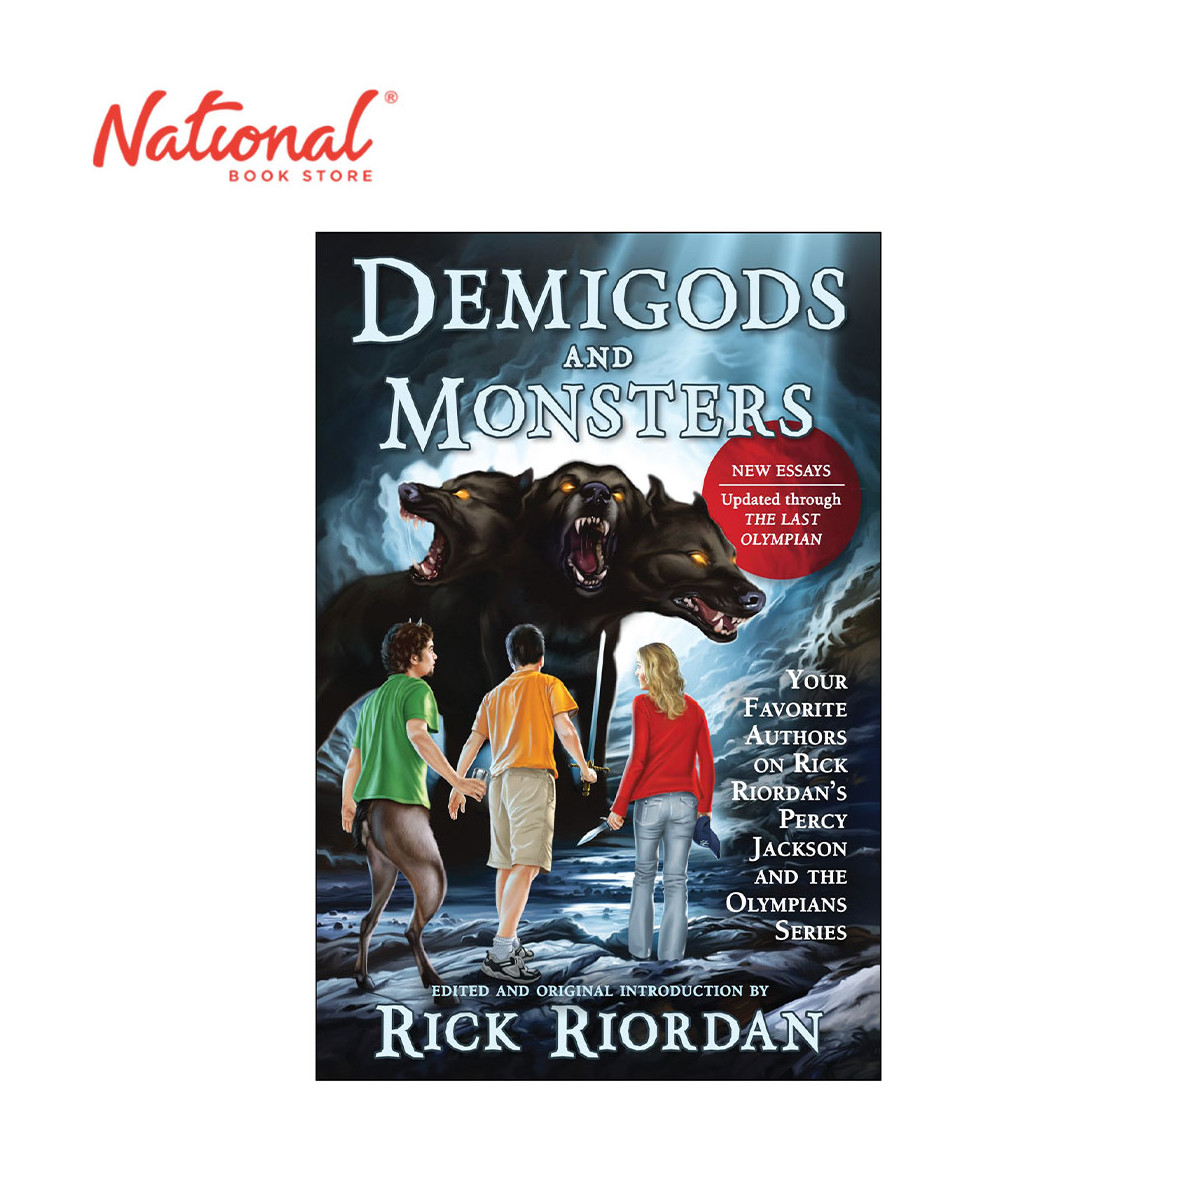 Demigods and Monsters: Your Favorite Authors On Rick Riordan's Percy Jackson & The Olympians Series